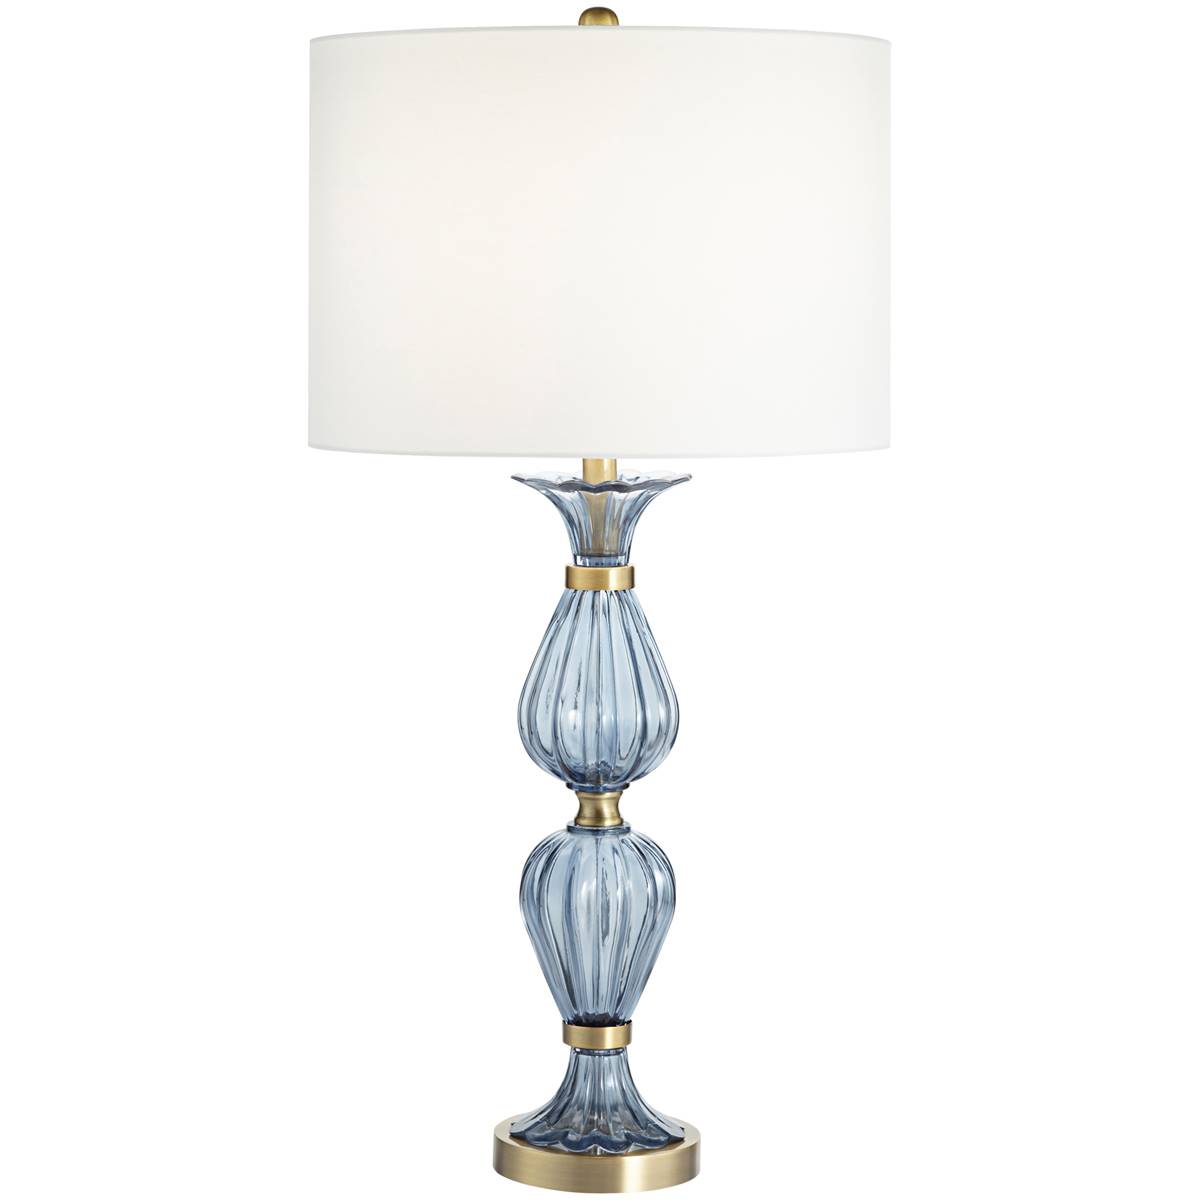 Pacific Coast Lighting Chateau Ariel 32.5in. Blue Table Lamp